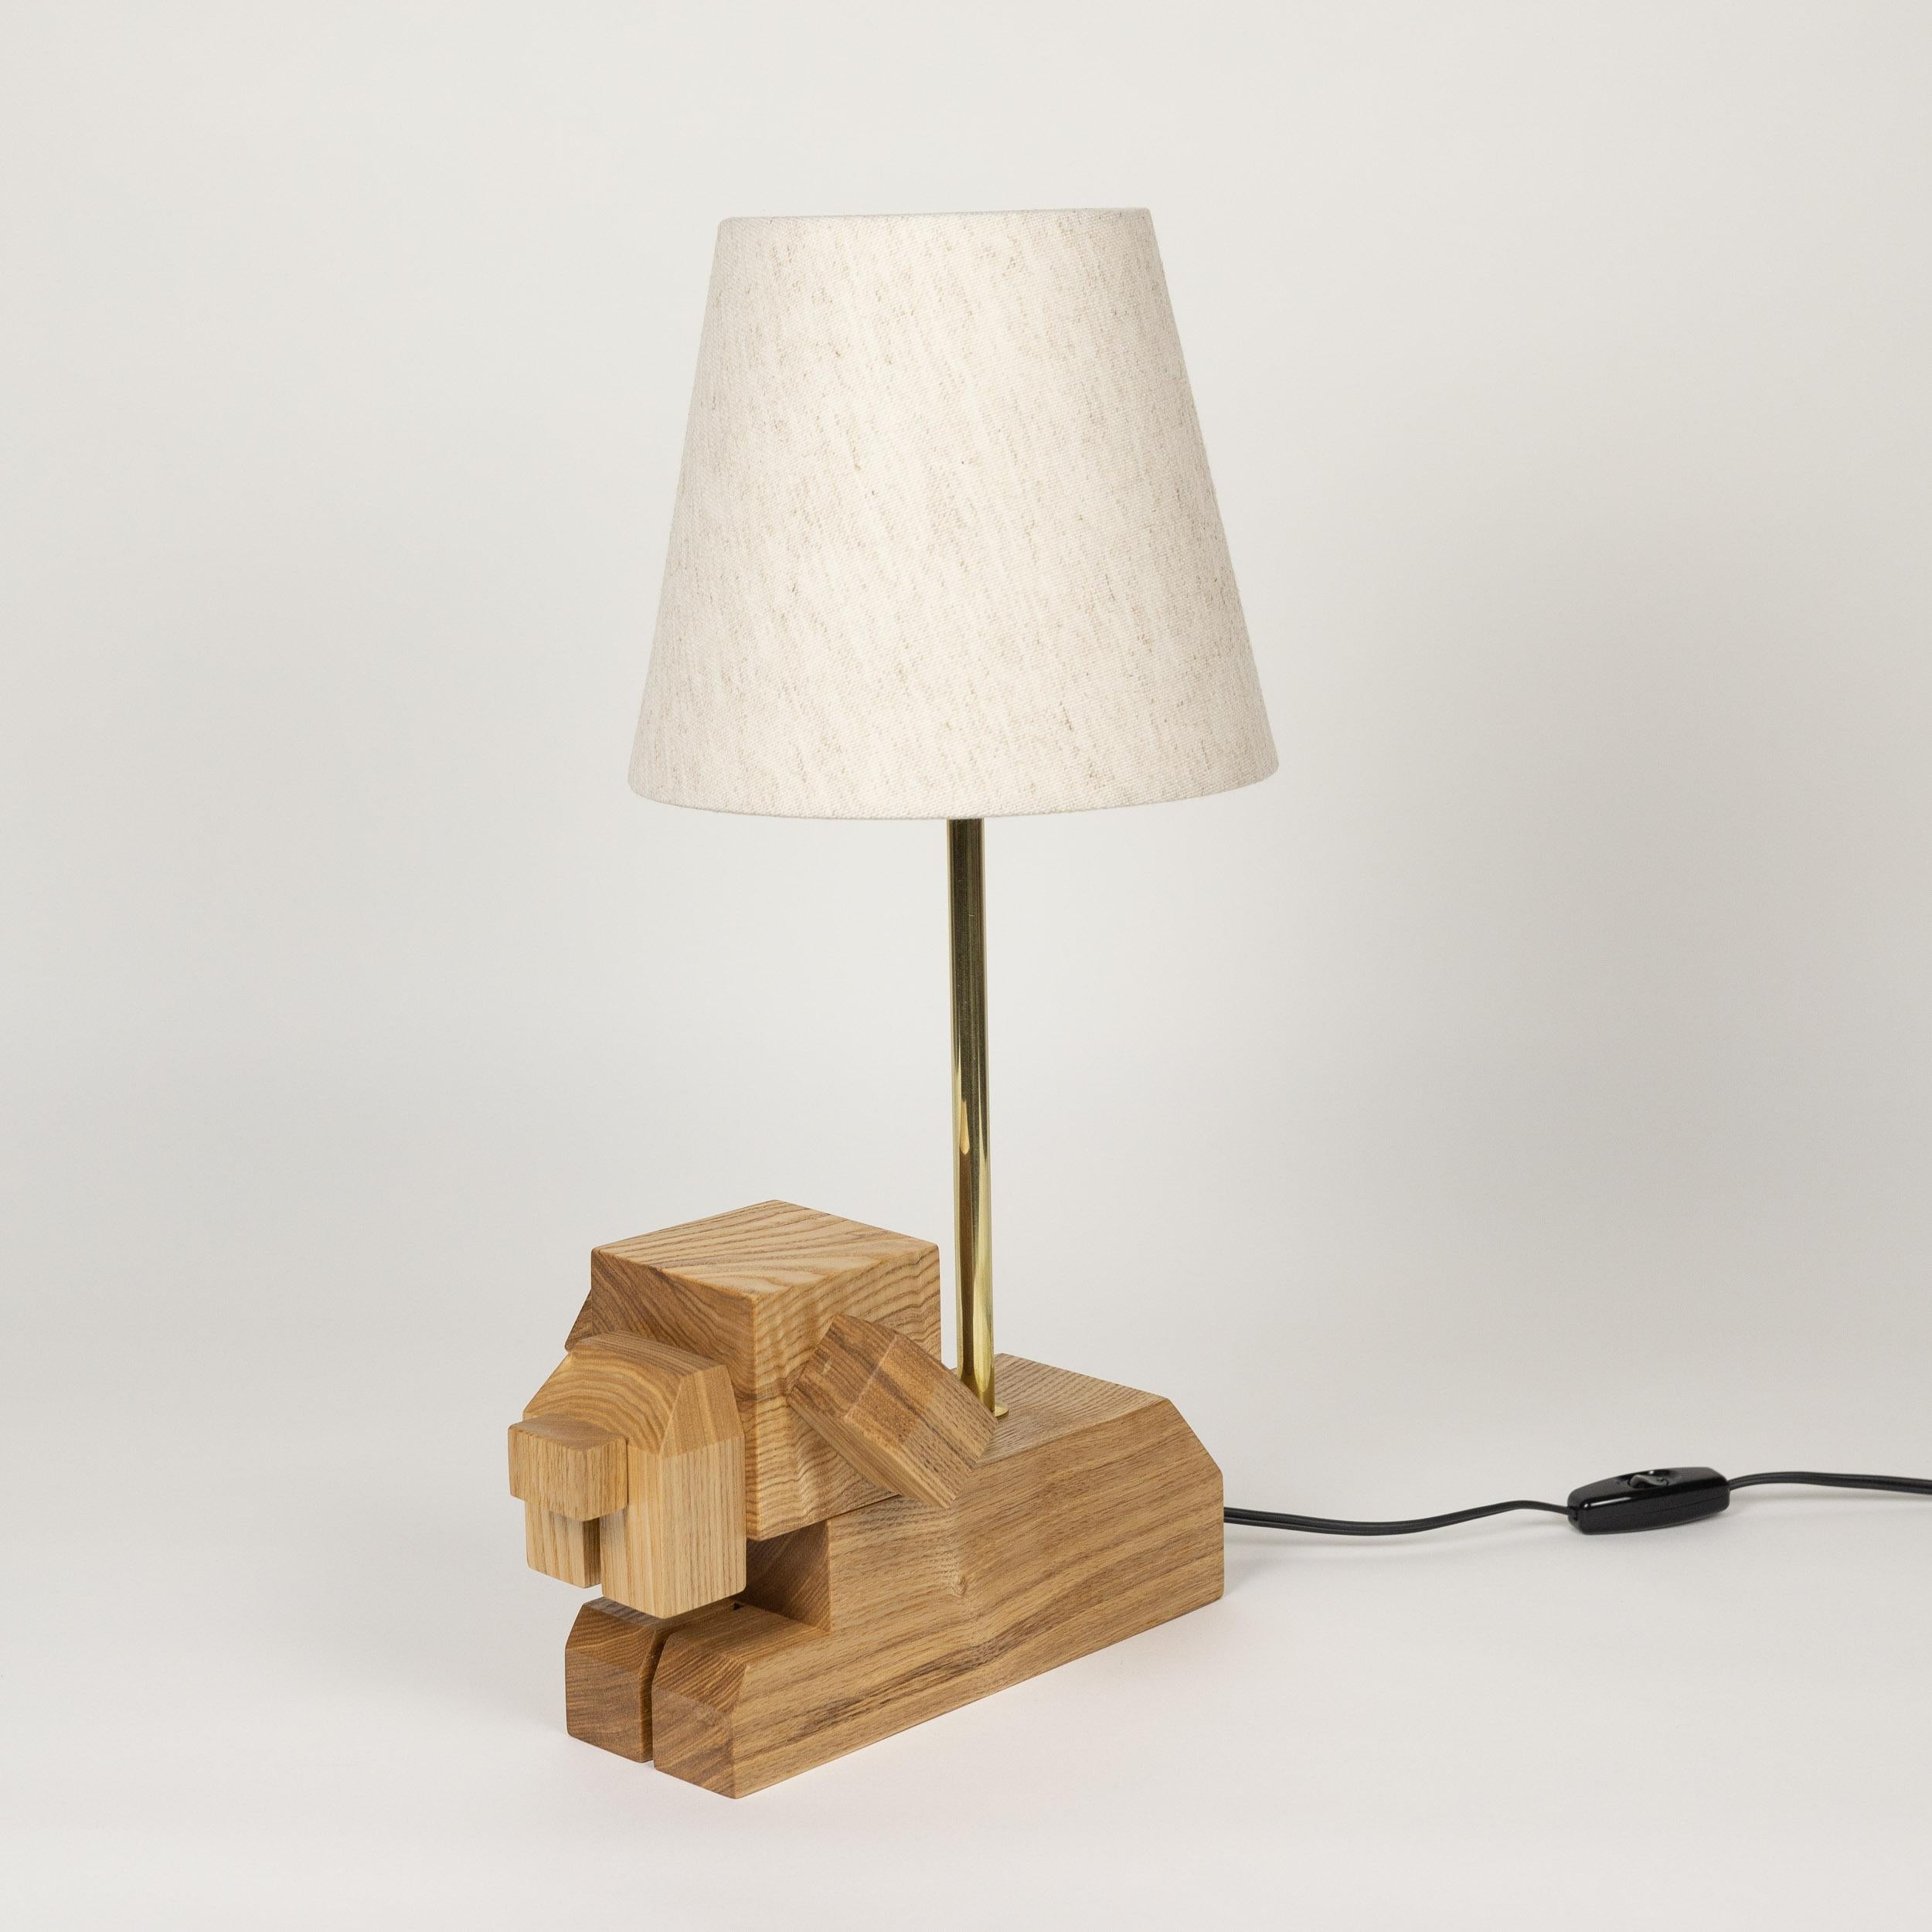 Japanese In-stock, Doggy Wooden Table Lamp by WANWANWONDERLAND, hardwood, fabric shade  For Sale